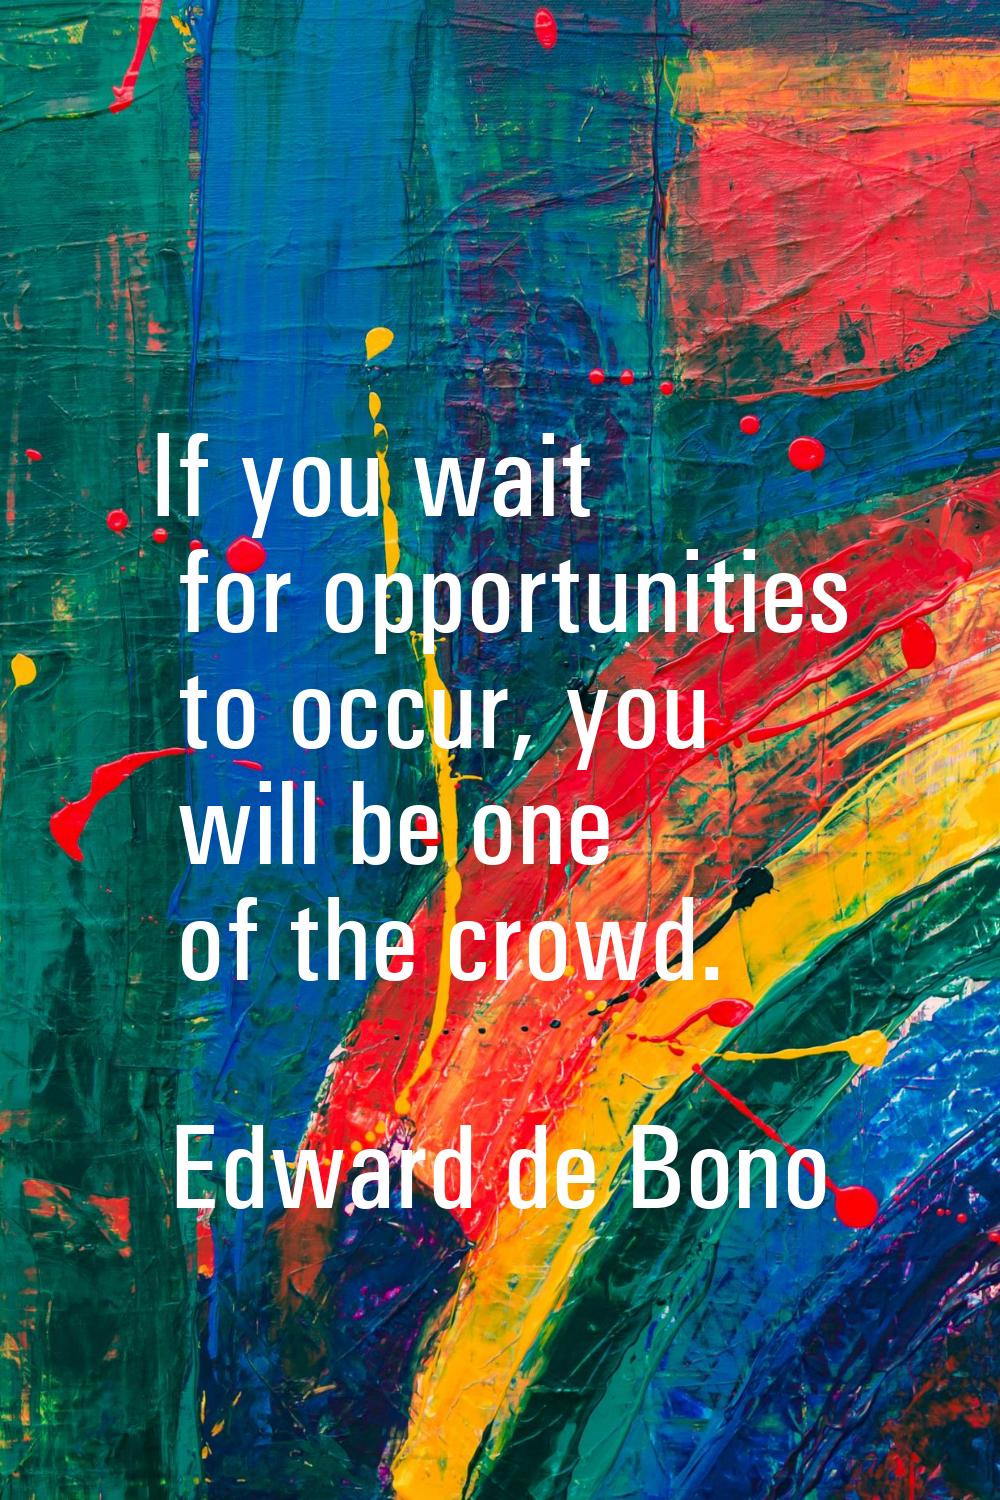 If you wait for opportunities to occur, you will be one of the crowd.